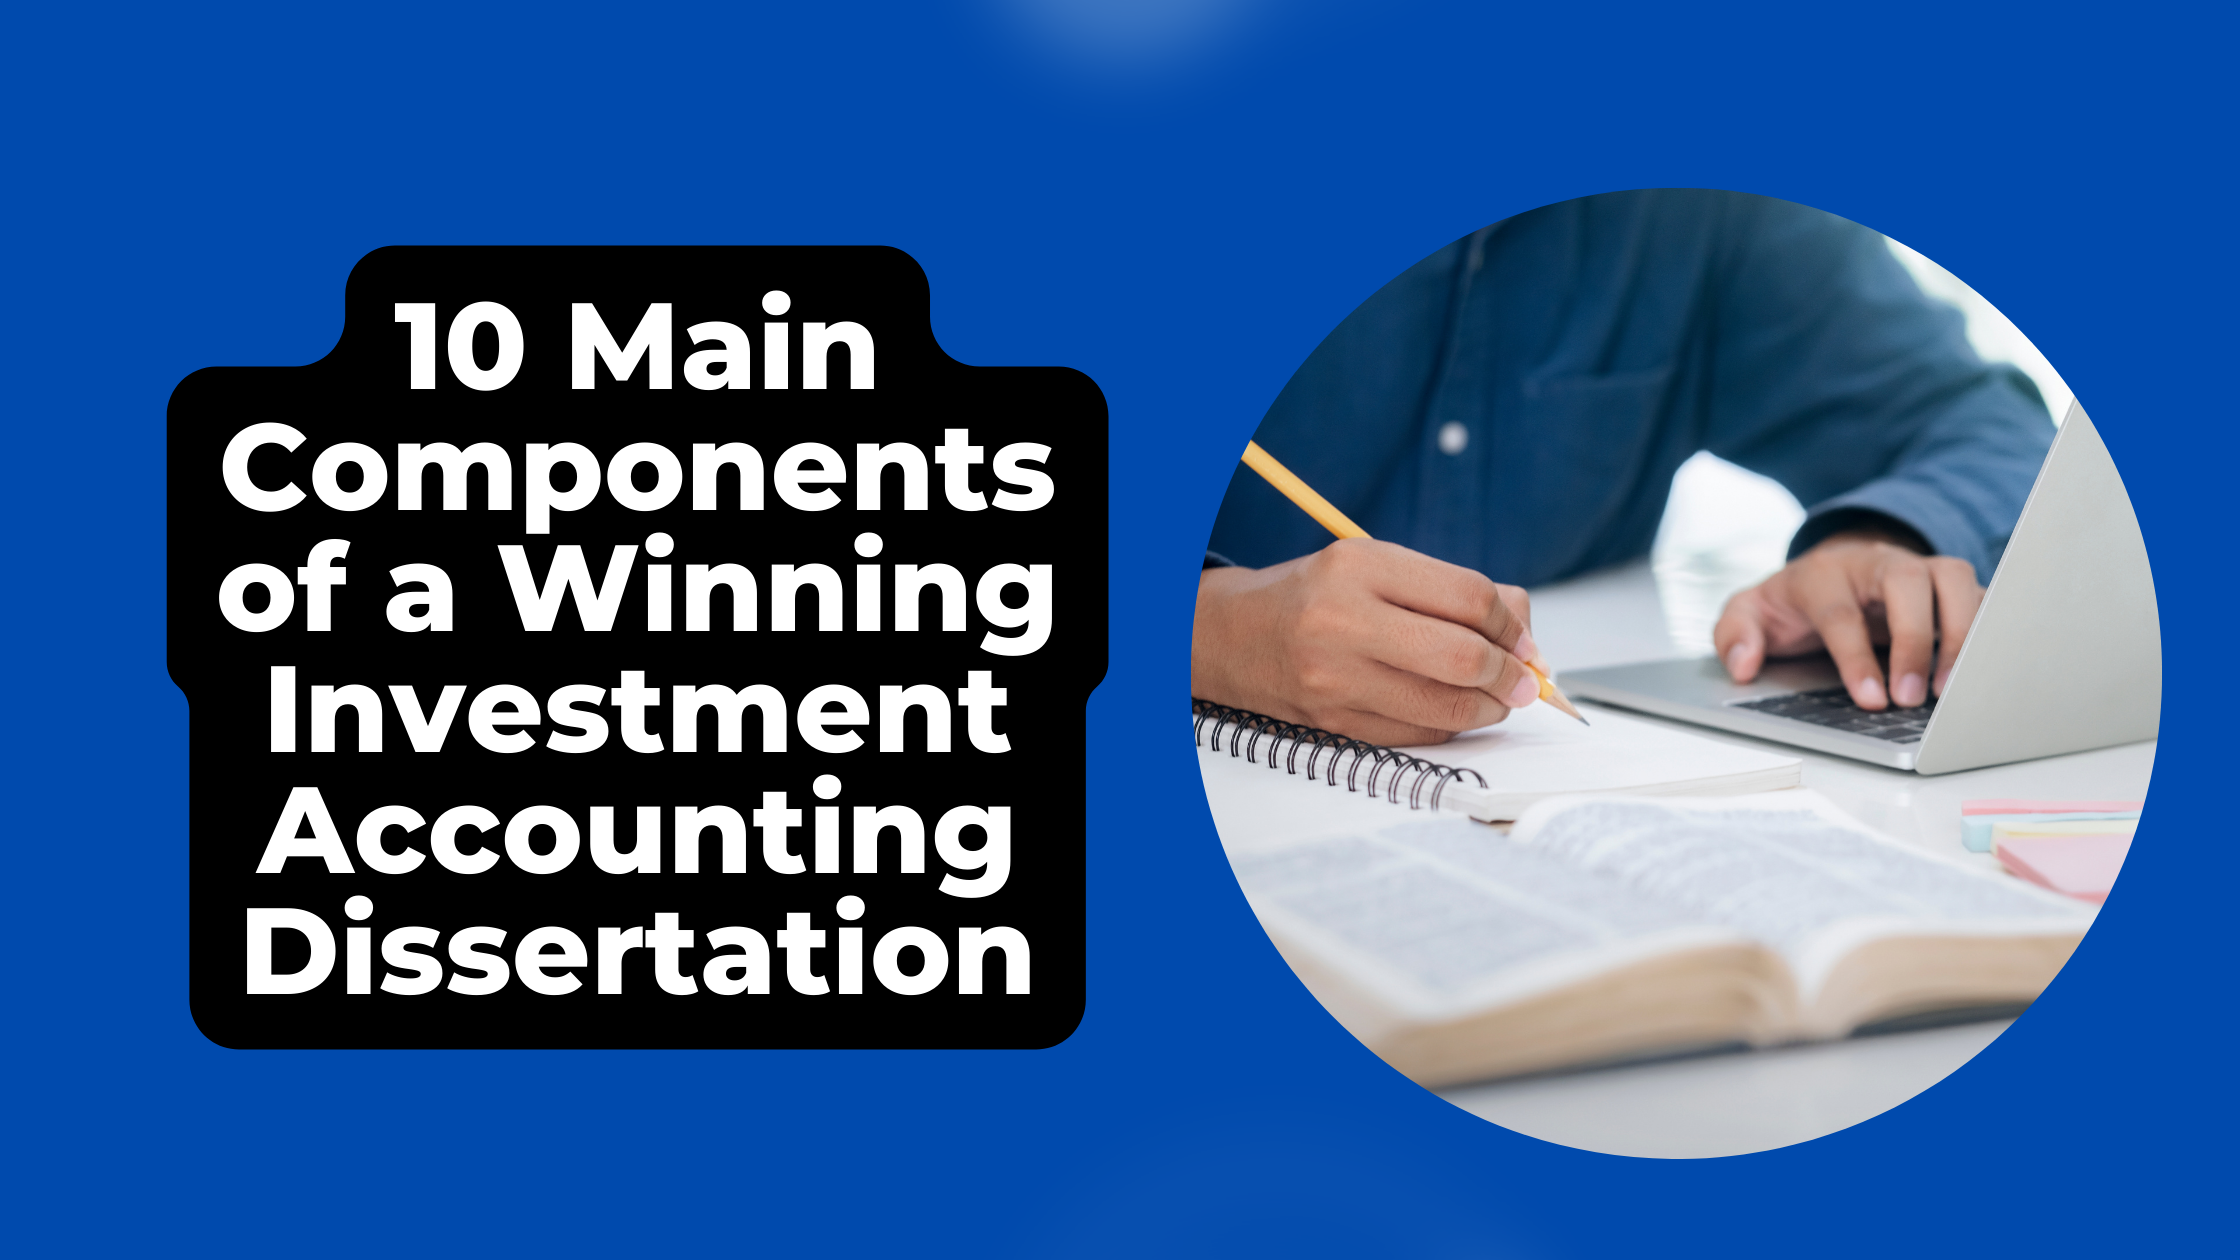 10 Main Components of a Winning Investment Accounting Dissertation